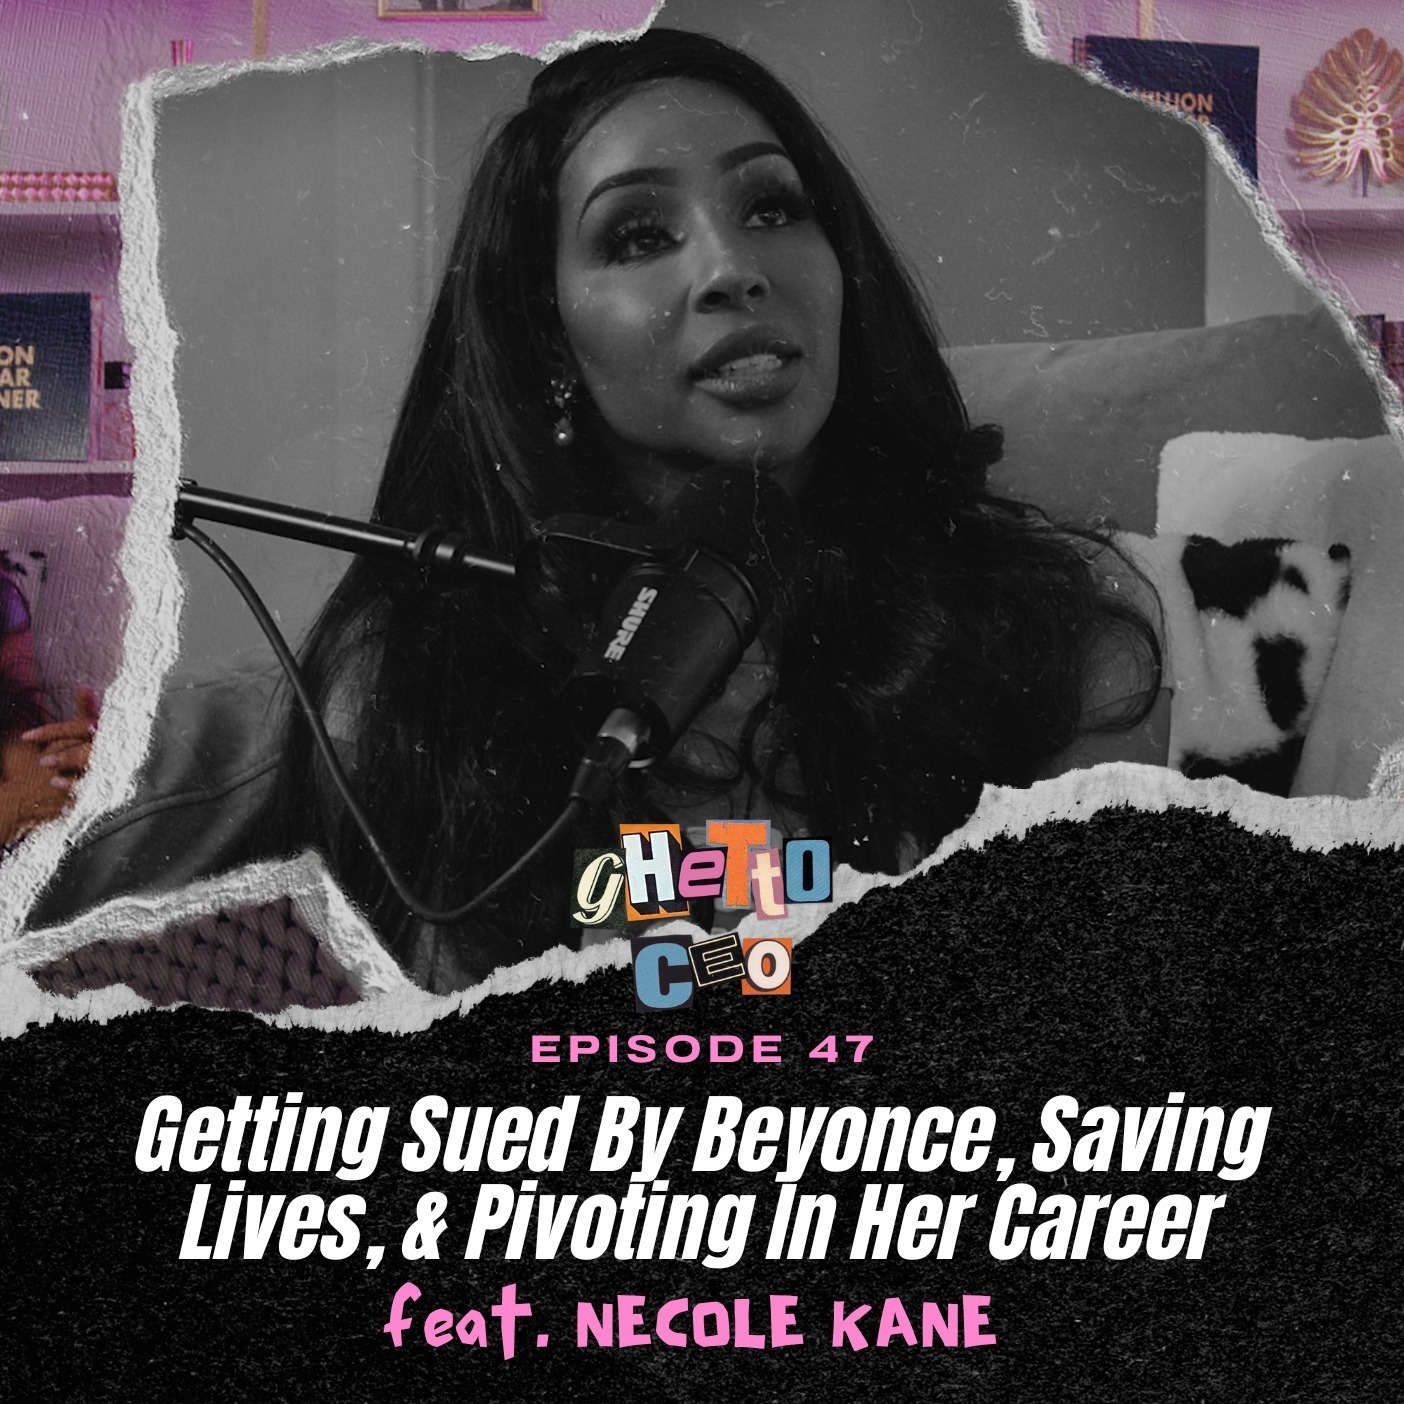 Ep. 47 - Necole Kane On Getting Sued By Beyonce, Saving Lives & Pivoting In Her Career